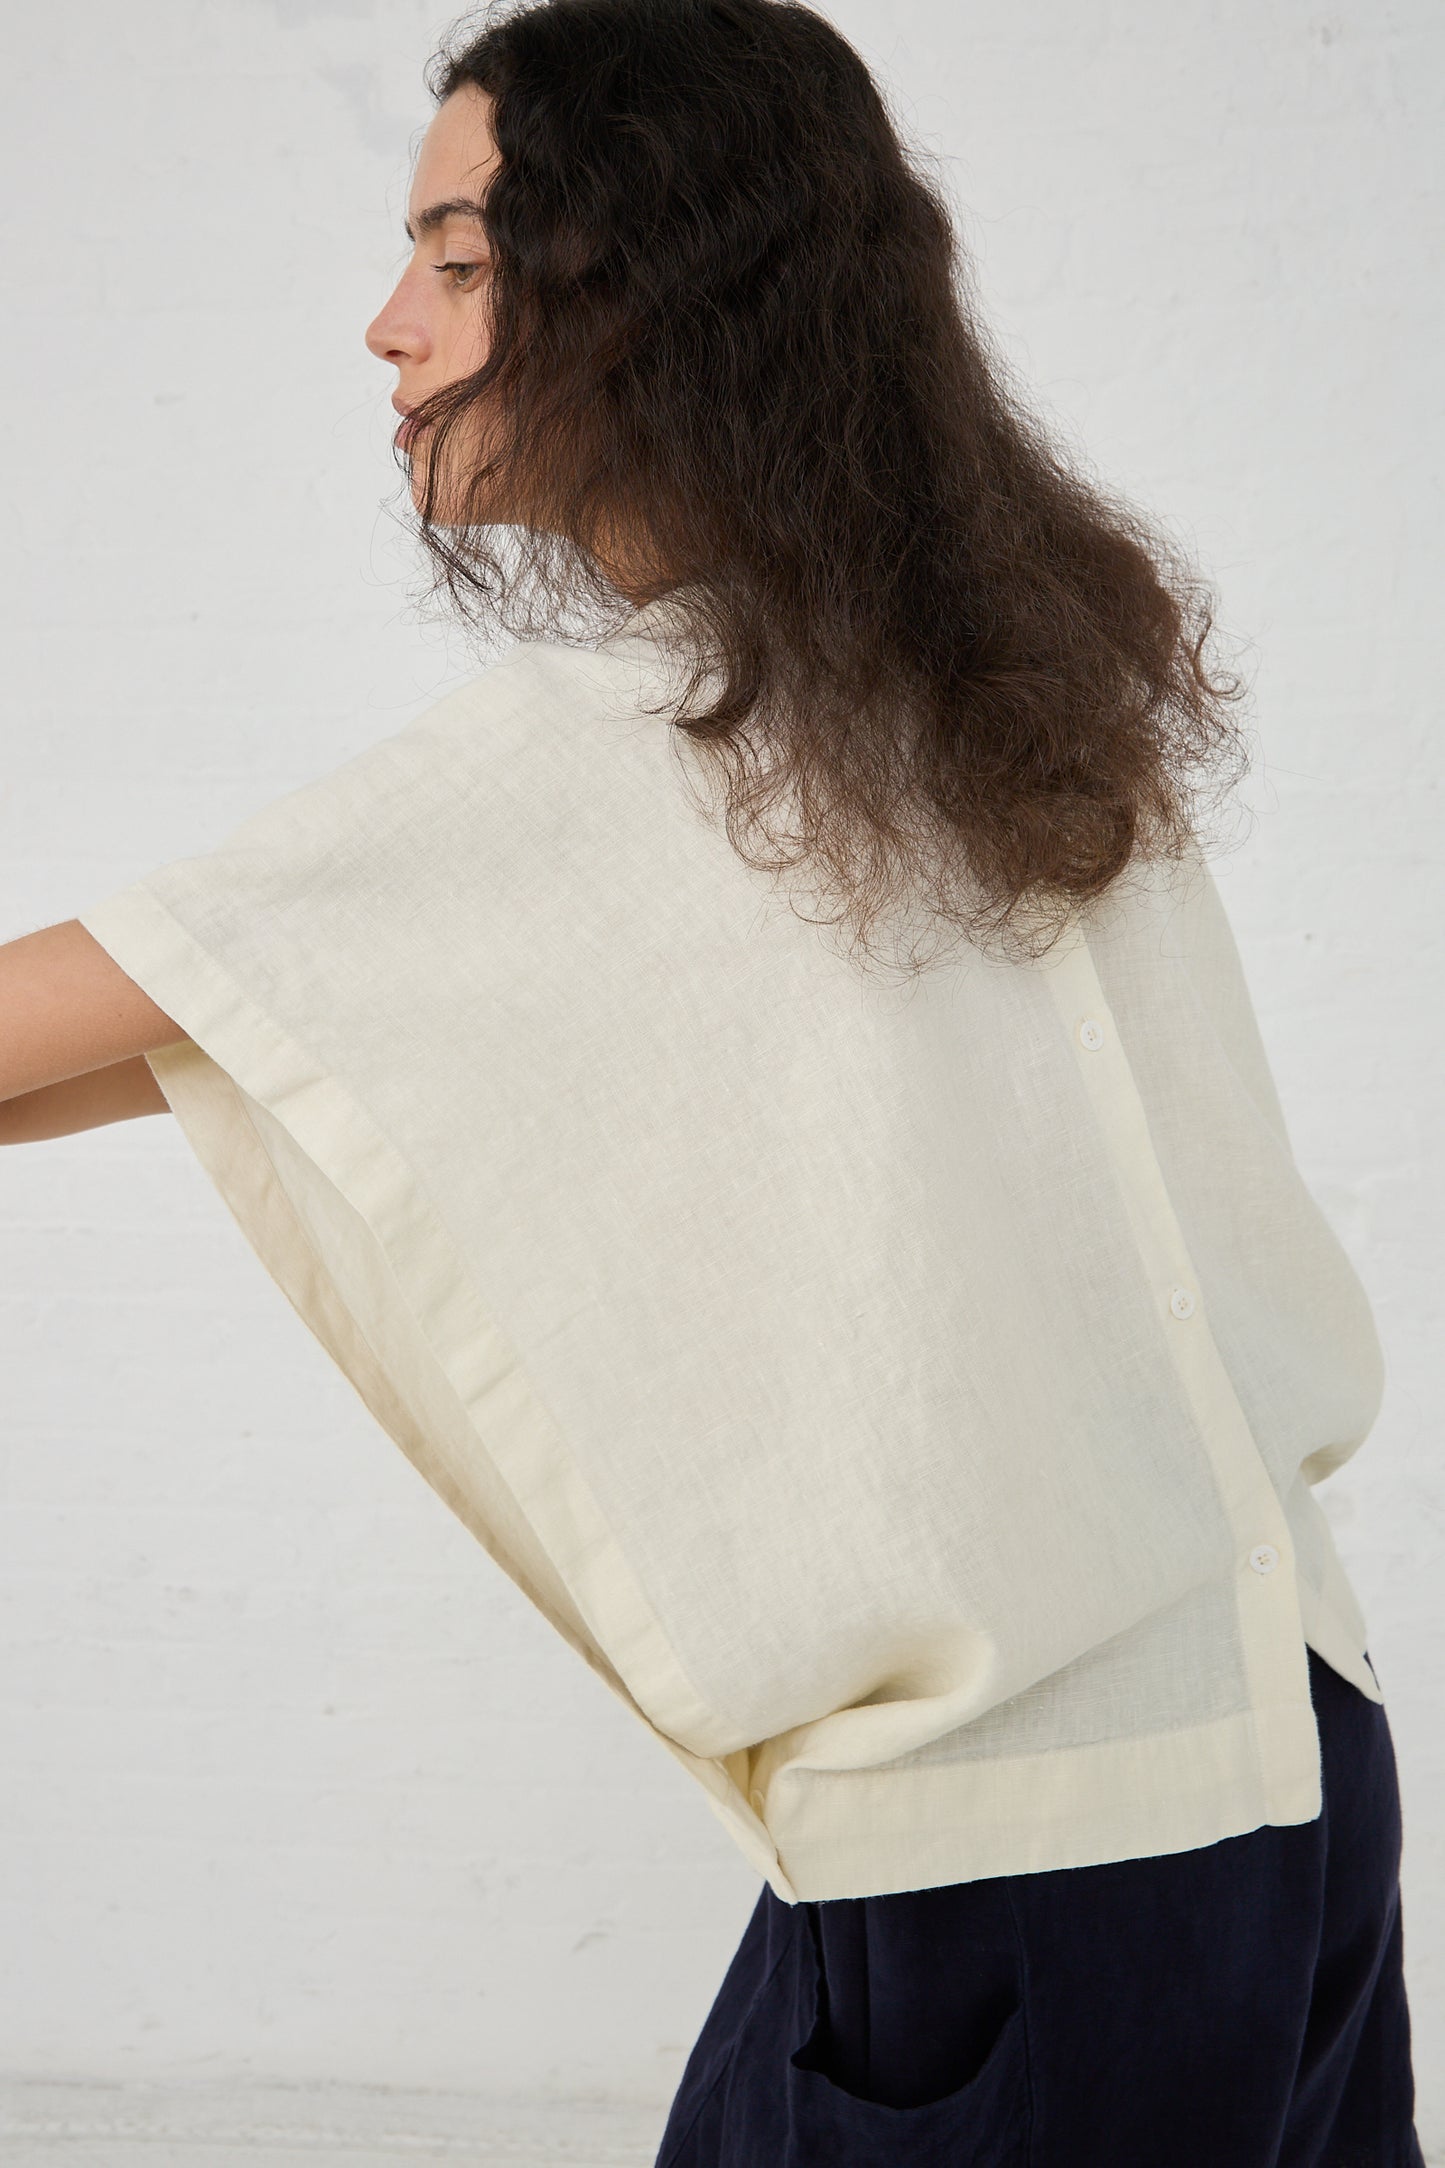 A woman with long dark hair is viewed from the side while adjusting a Black Crane Linen Origami Top in Cream with a boxy fit on her torso. The background is a plain white wall.